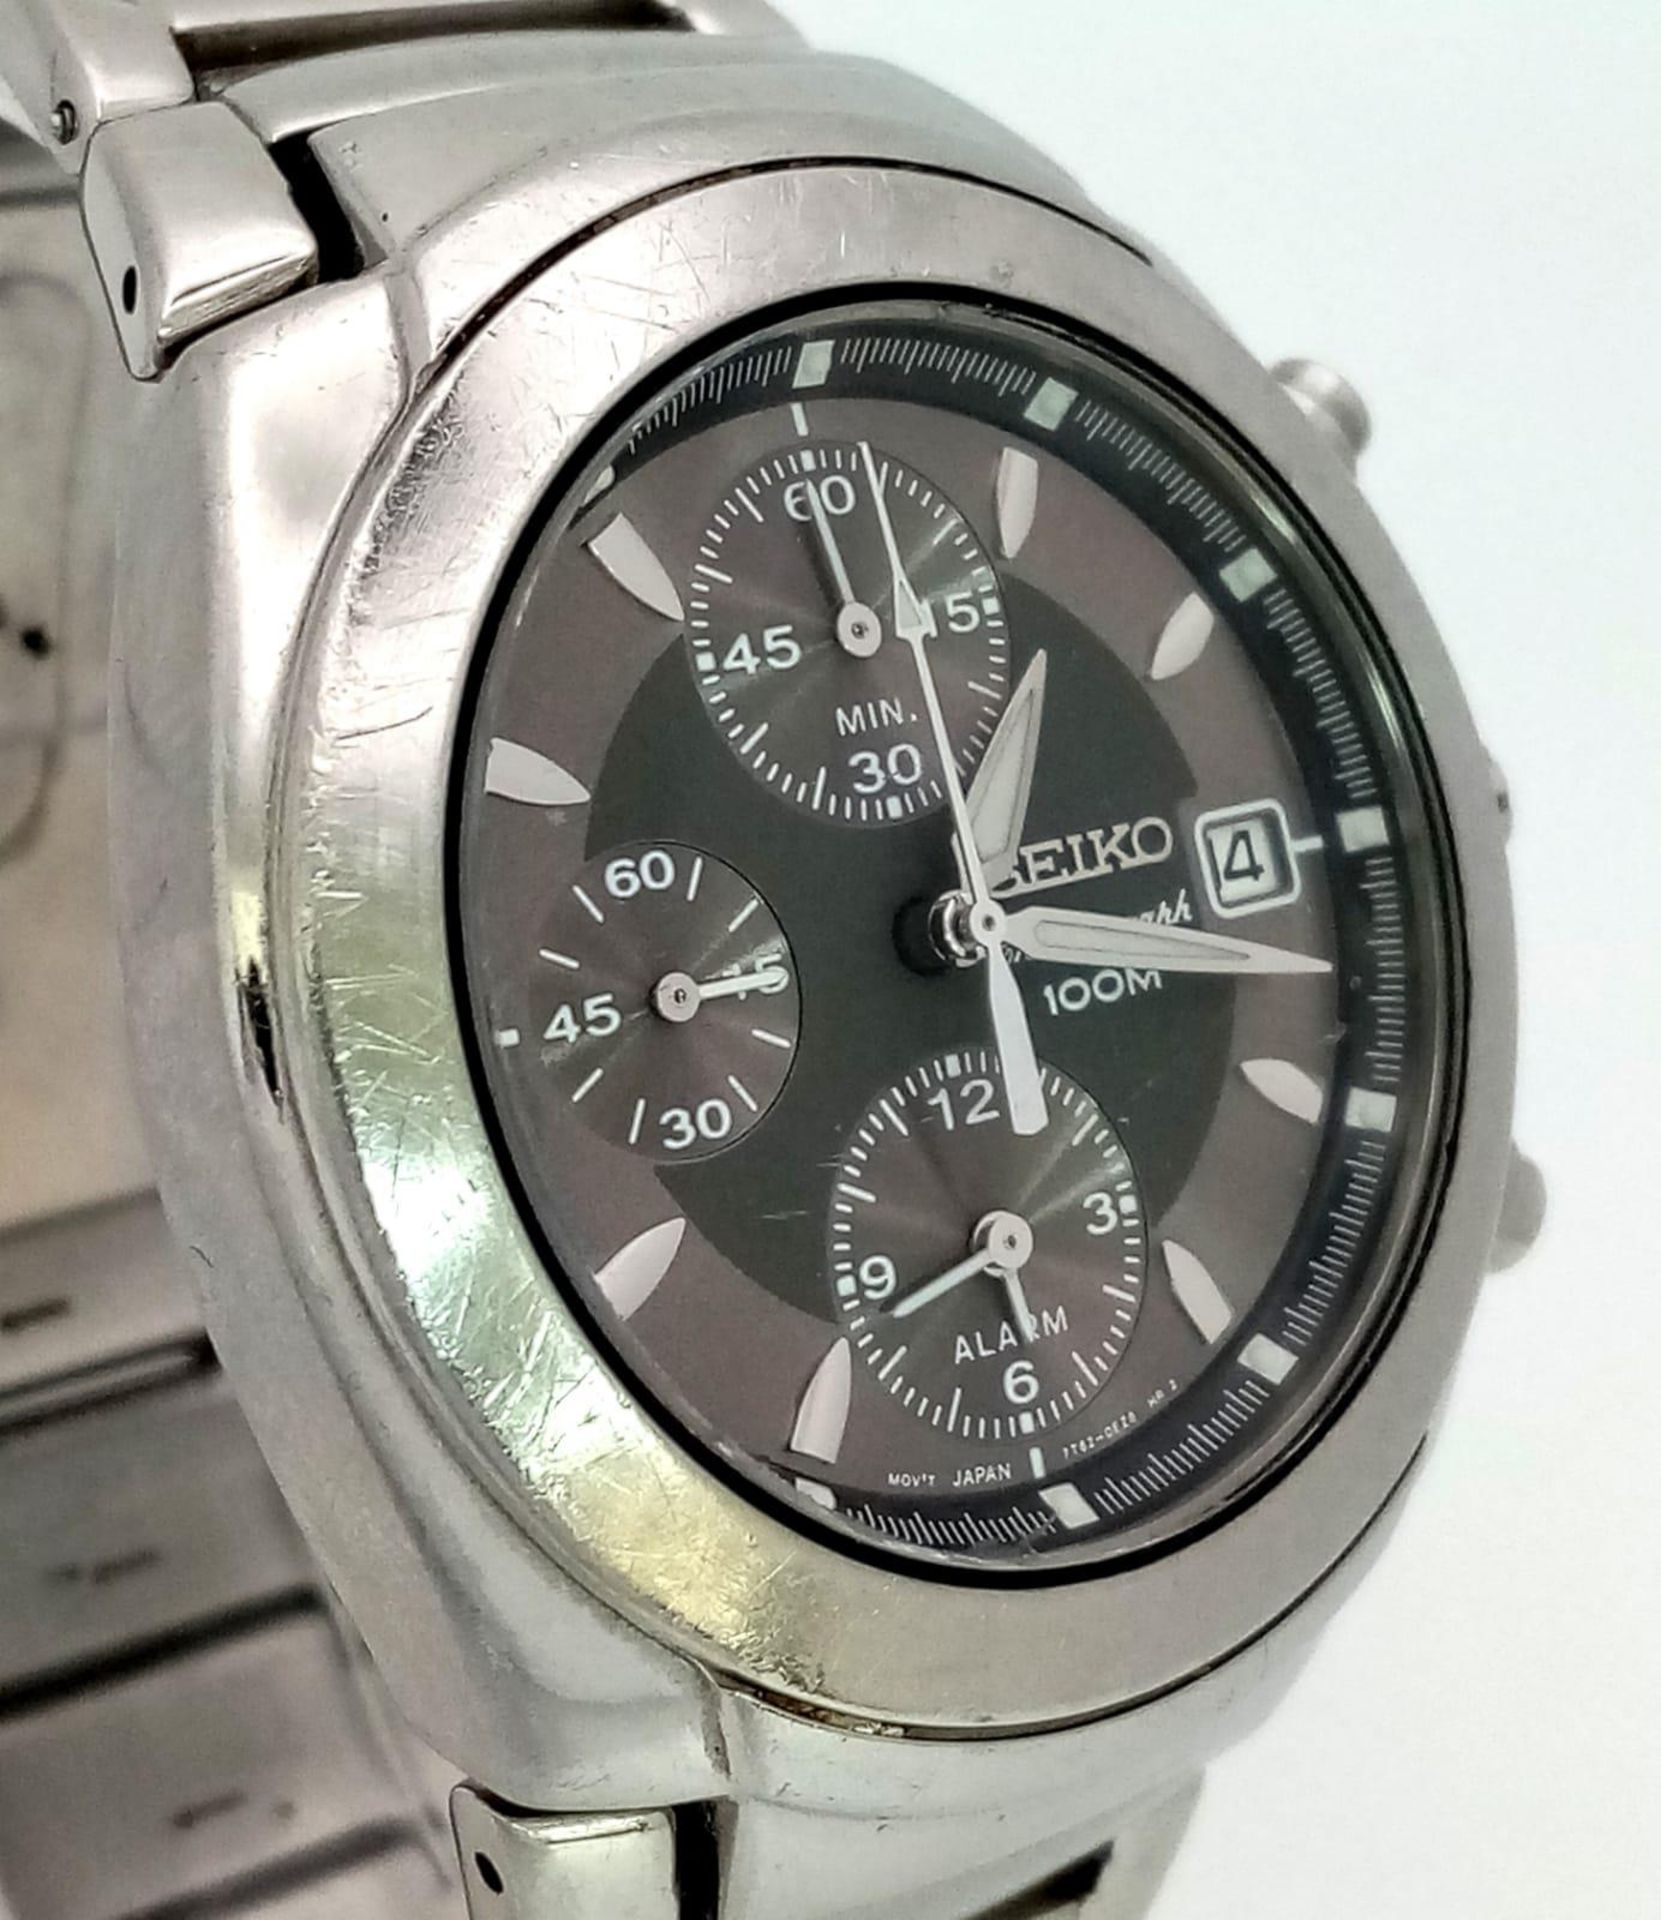 A Seiko Chronograph Quartz Gens Watch. Stainless steel strap and case - 40mm. Silver tone dial - Image 5 of 13